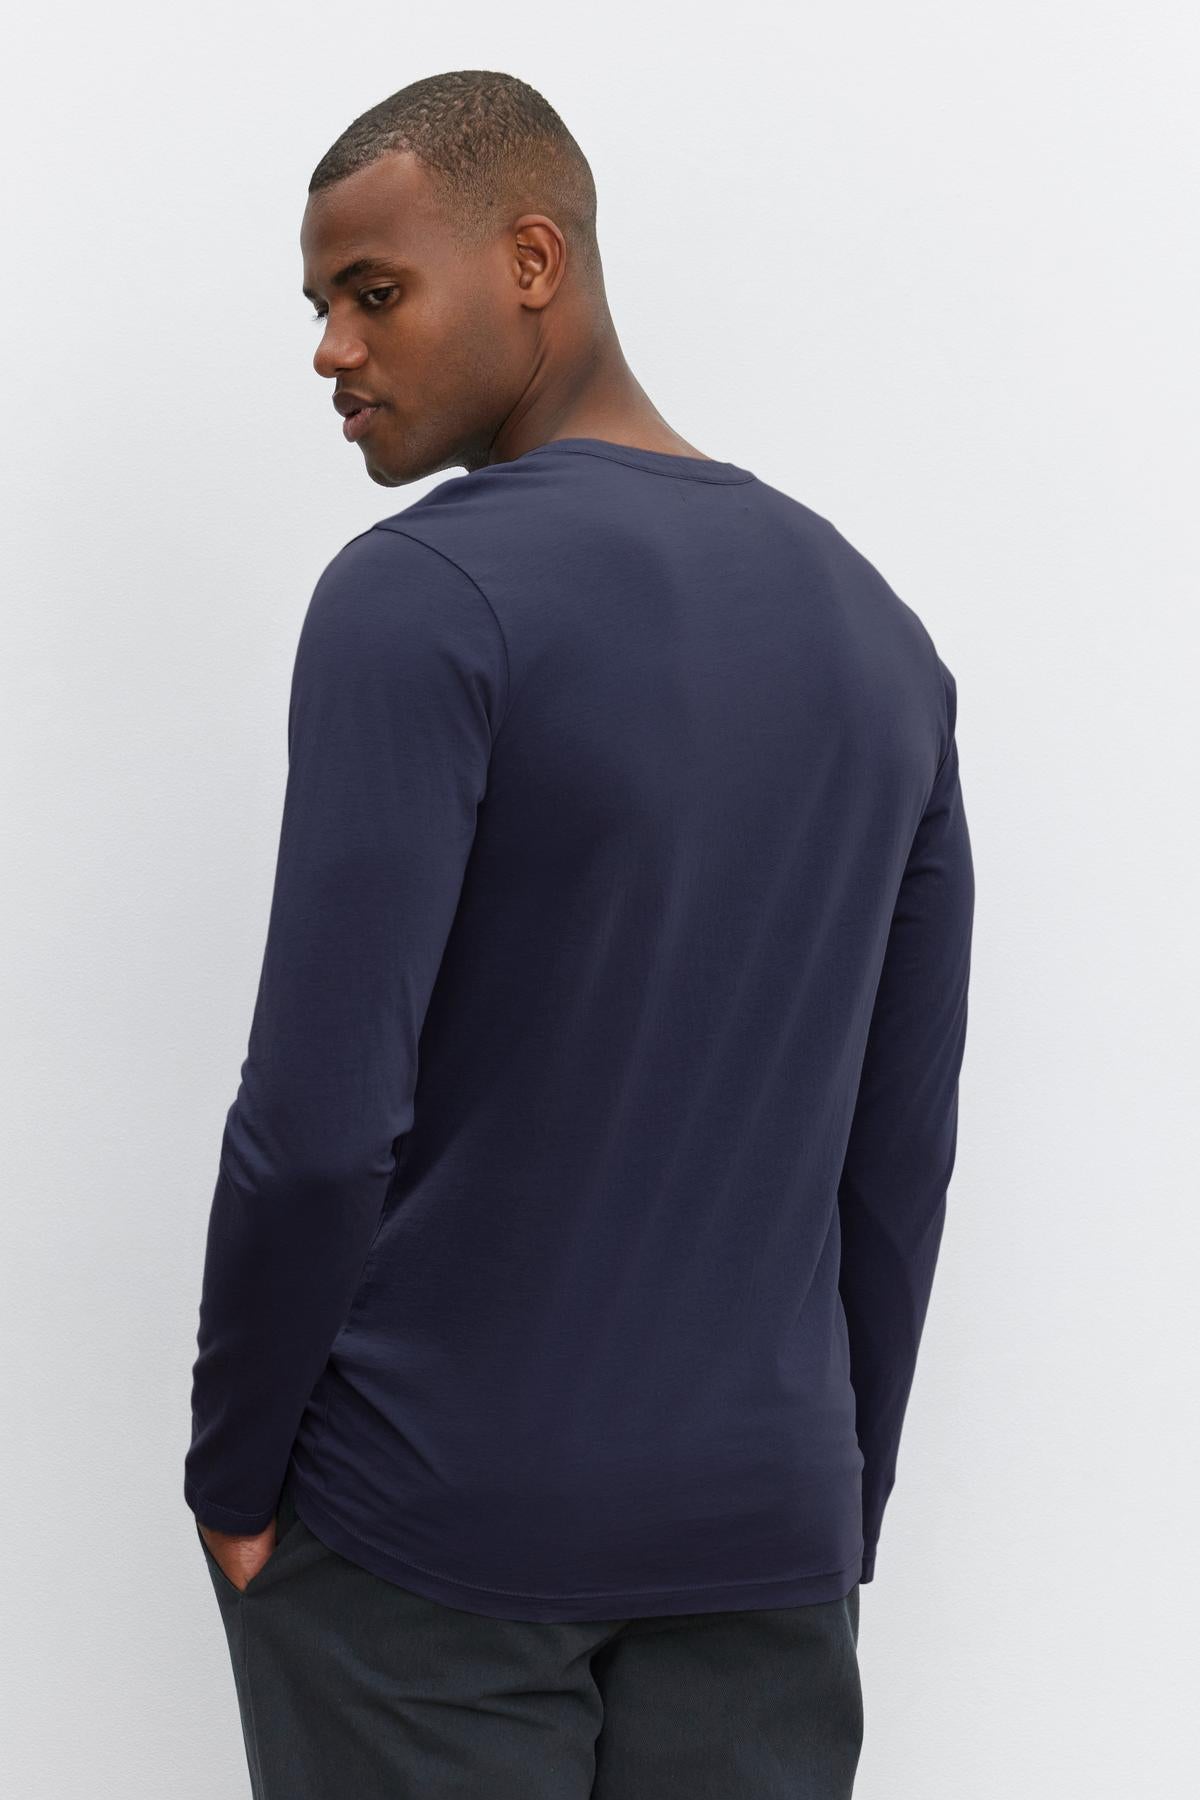 A person wearing a navy blue Velvet by Graham & Spencer ALVARO HENLEY and dark pants stands with their back turned while slightly looking over their shoulder.-36273890590913